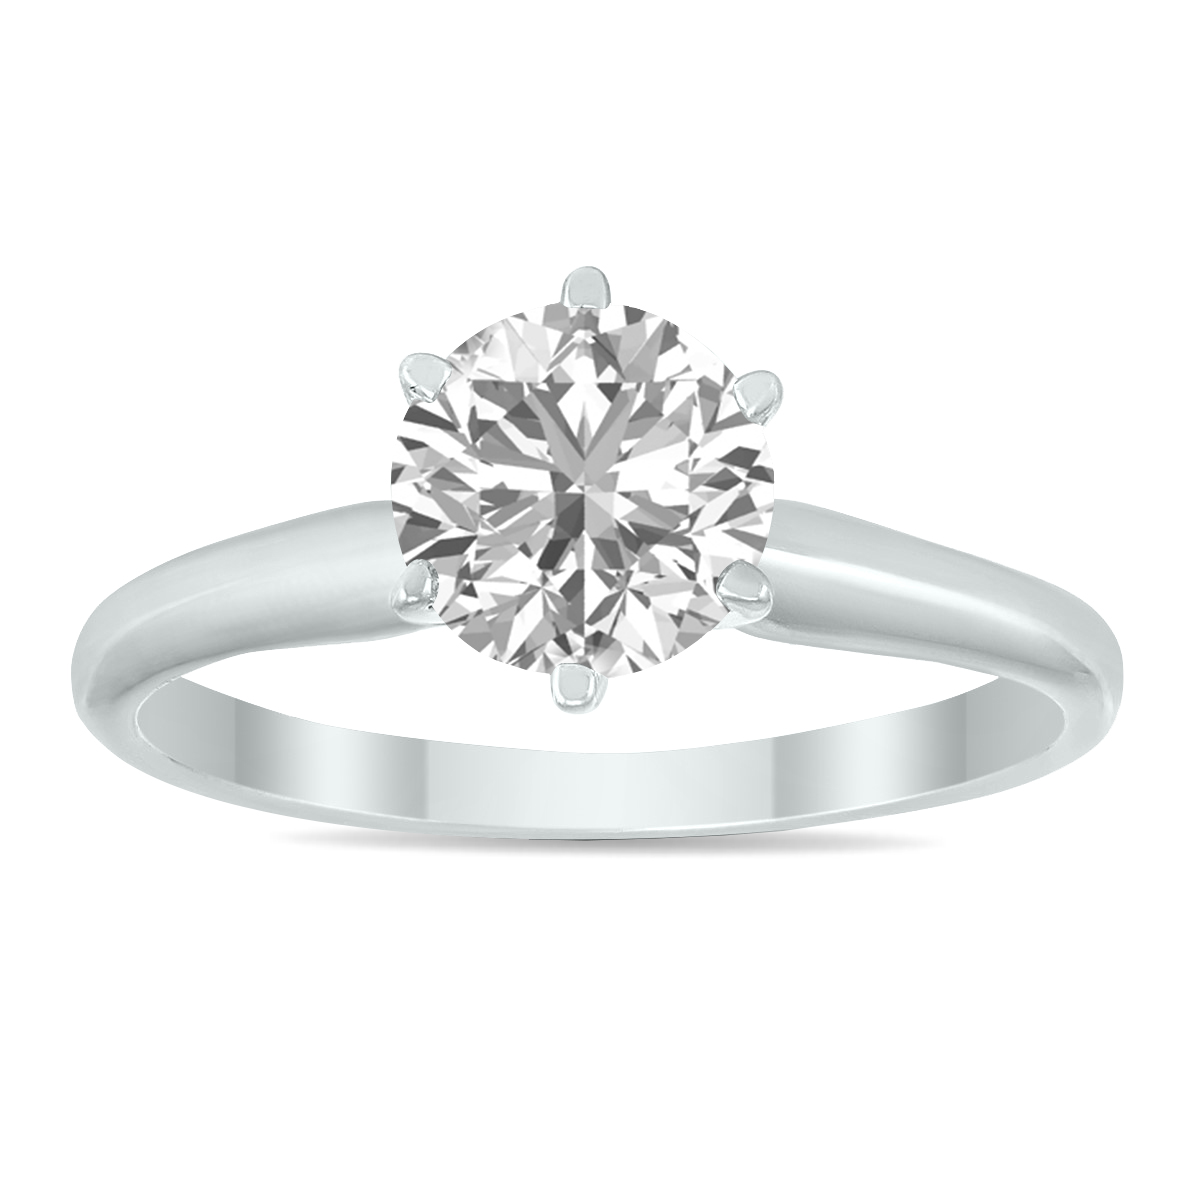 Image of IGI Certified Lab Grown 1 Carat Diamond Solitaire Ring in 14K White Gold (I Color SI2 Clarity)